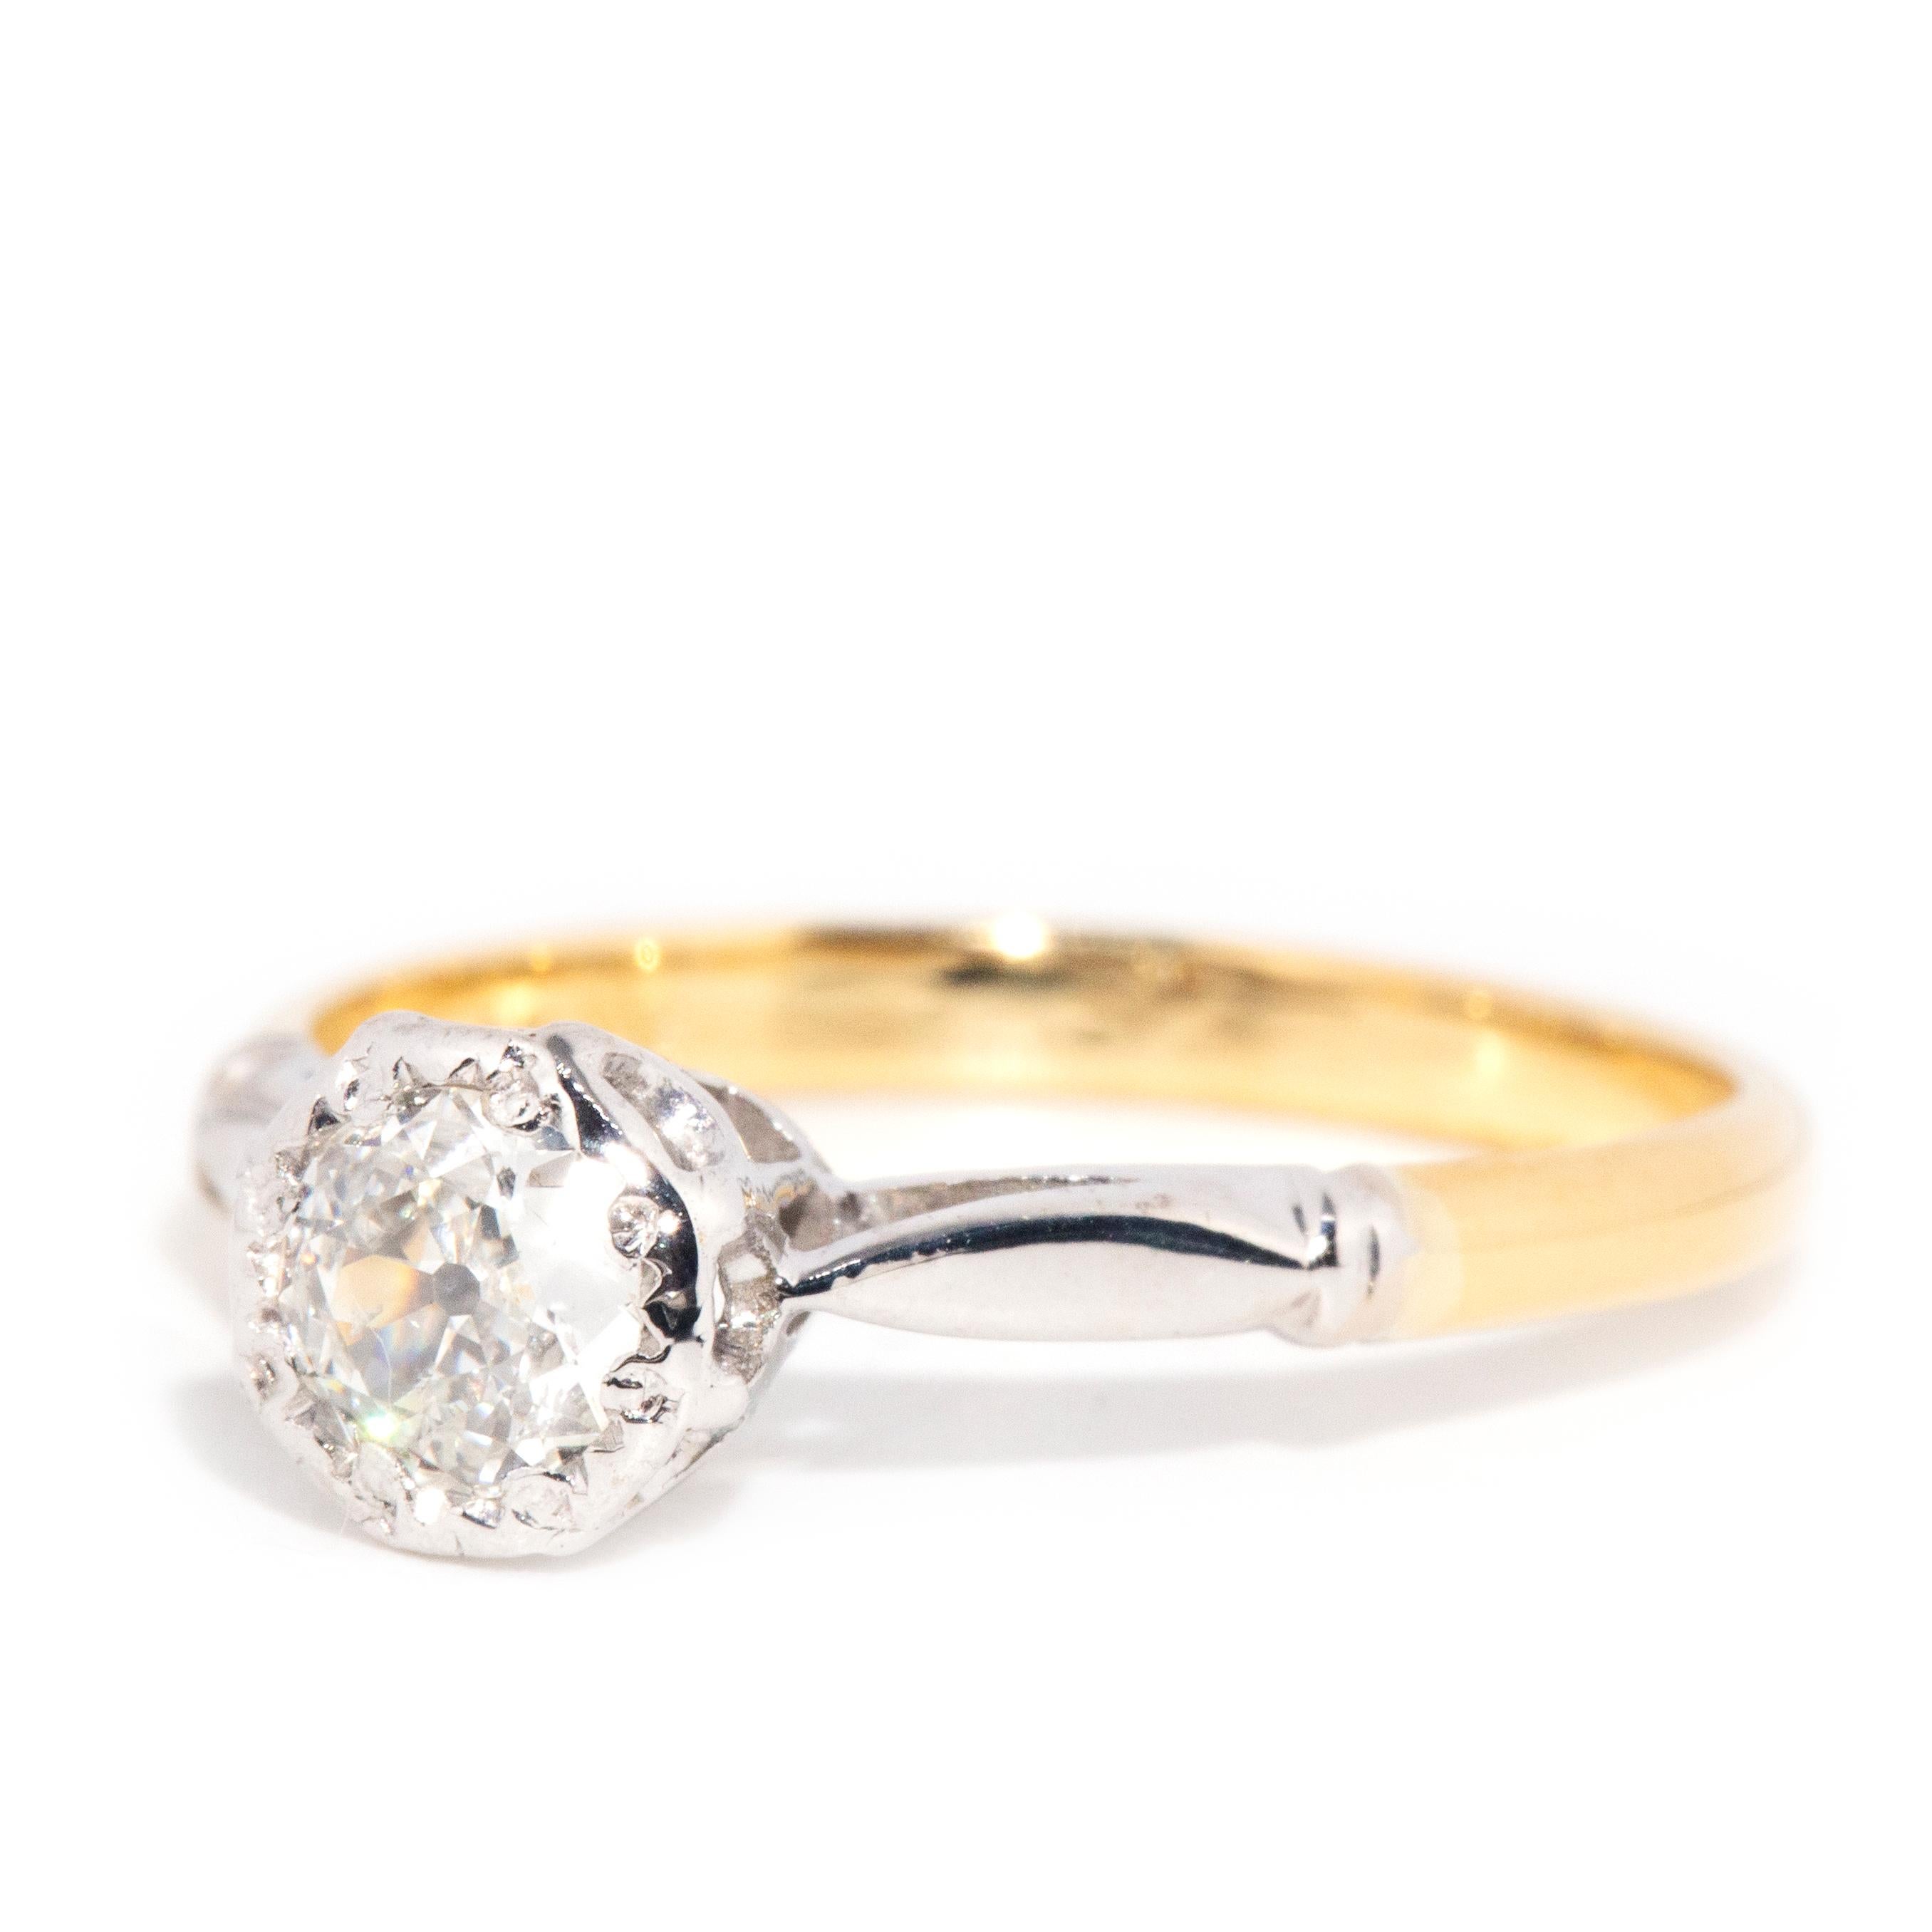 Old European Cut Vintage Circa 1940s 18 Carat Yellow & White Gold Old Cut Solitaire Diamond Ring For Sale